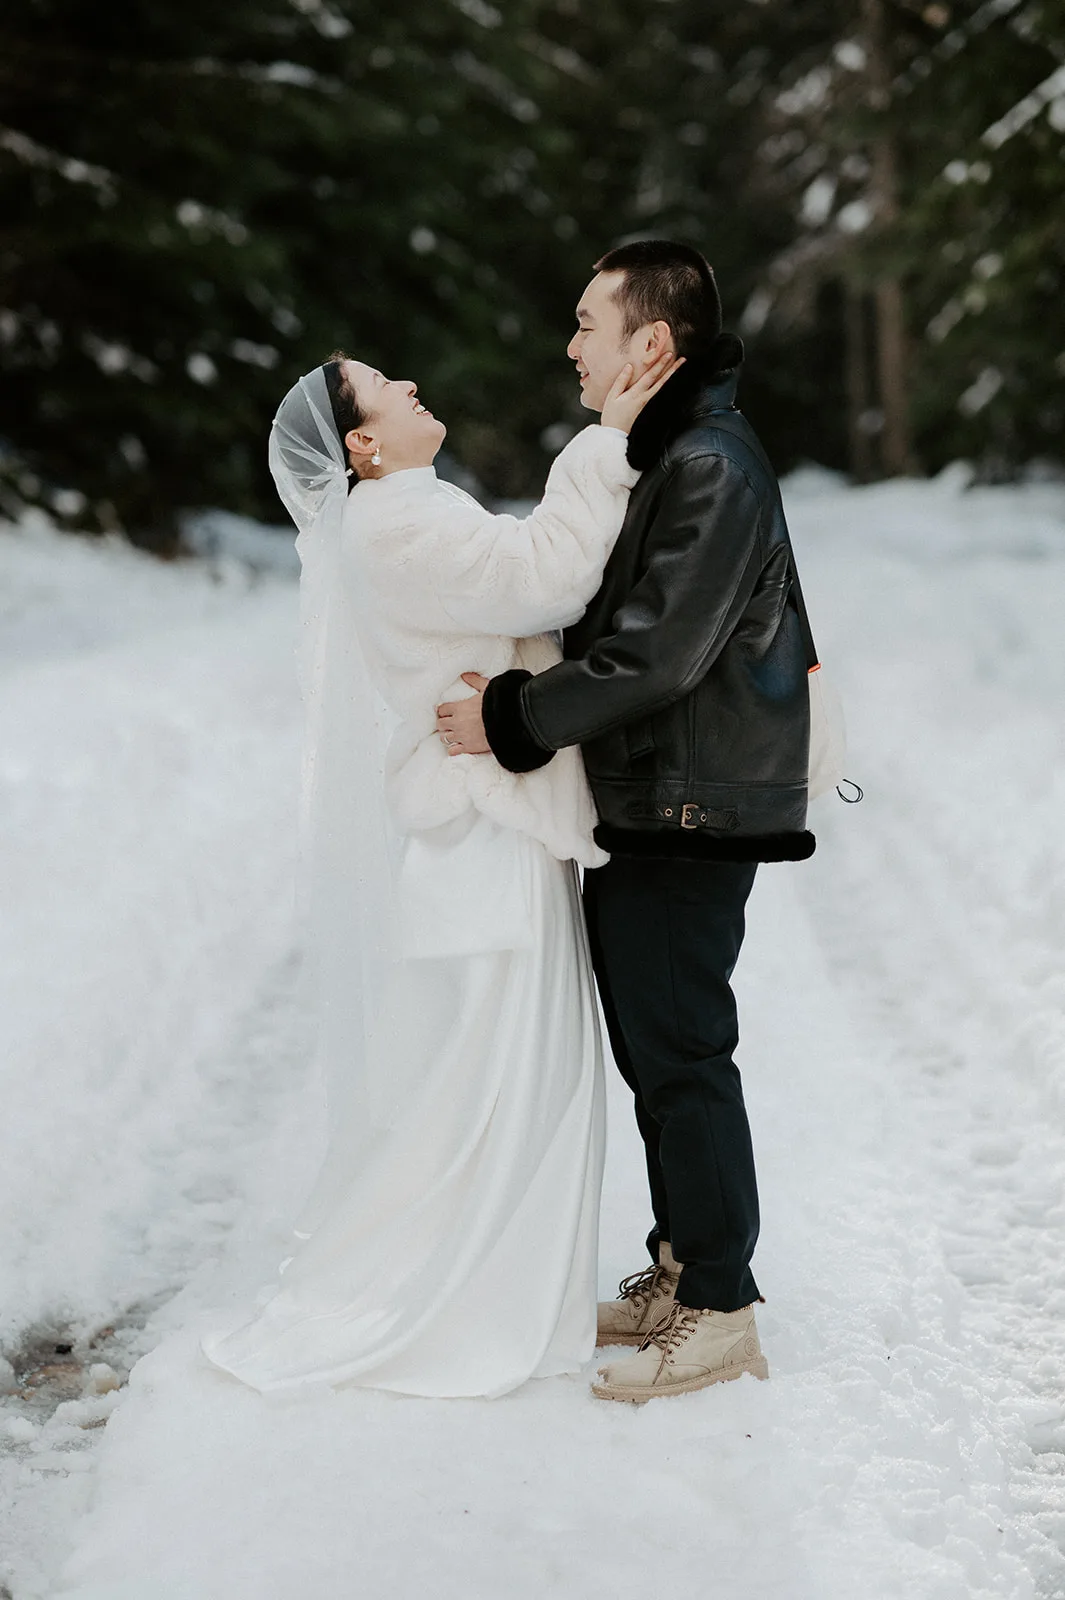 Bride in a white fur coat and groom in a leather jacket share a joyful moment during their snowy mountain elopement, surrounded by a peaceful winter forest.